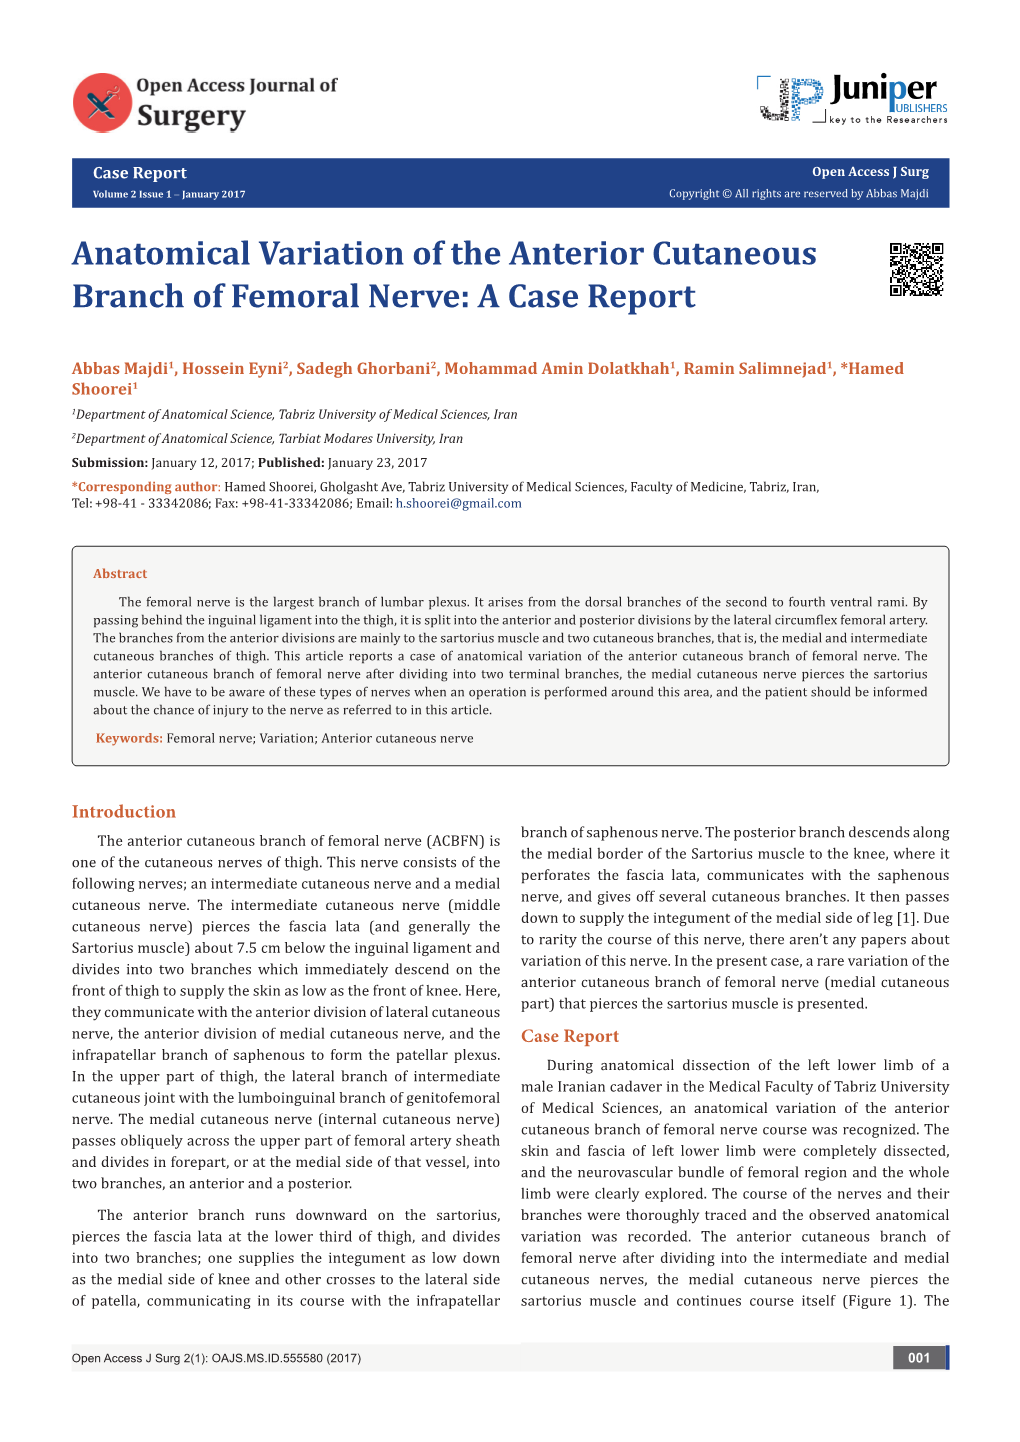 Anatomical Variation of the Anterior Cutaneous Branch of Femoral Nerve: a Case Report